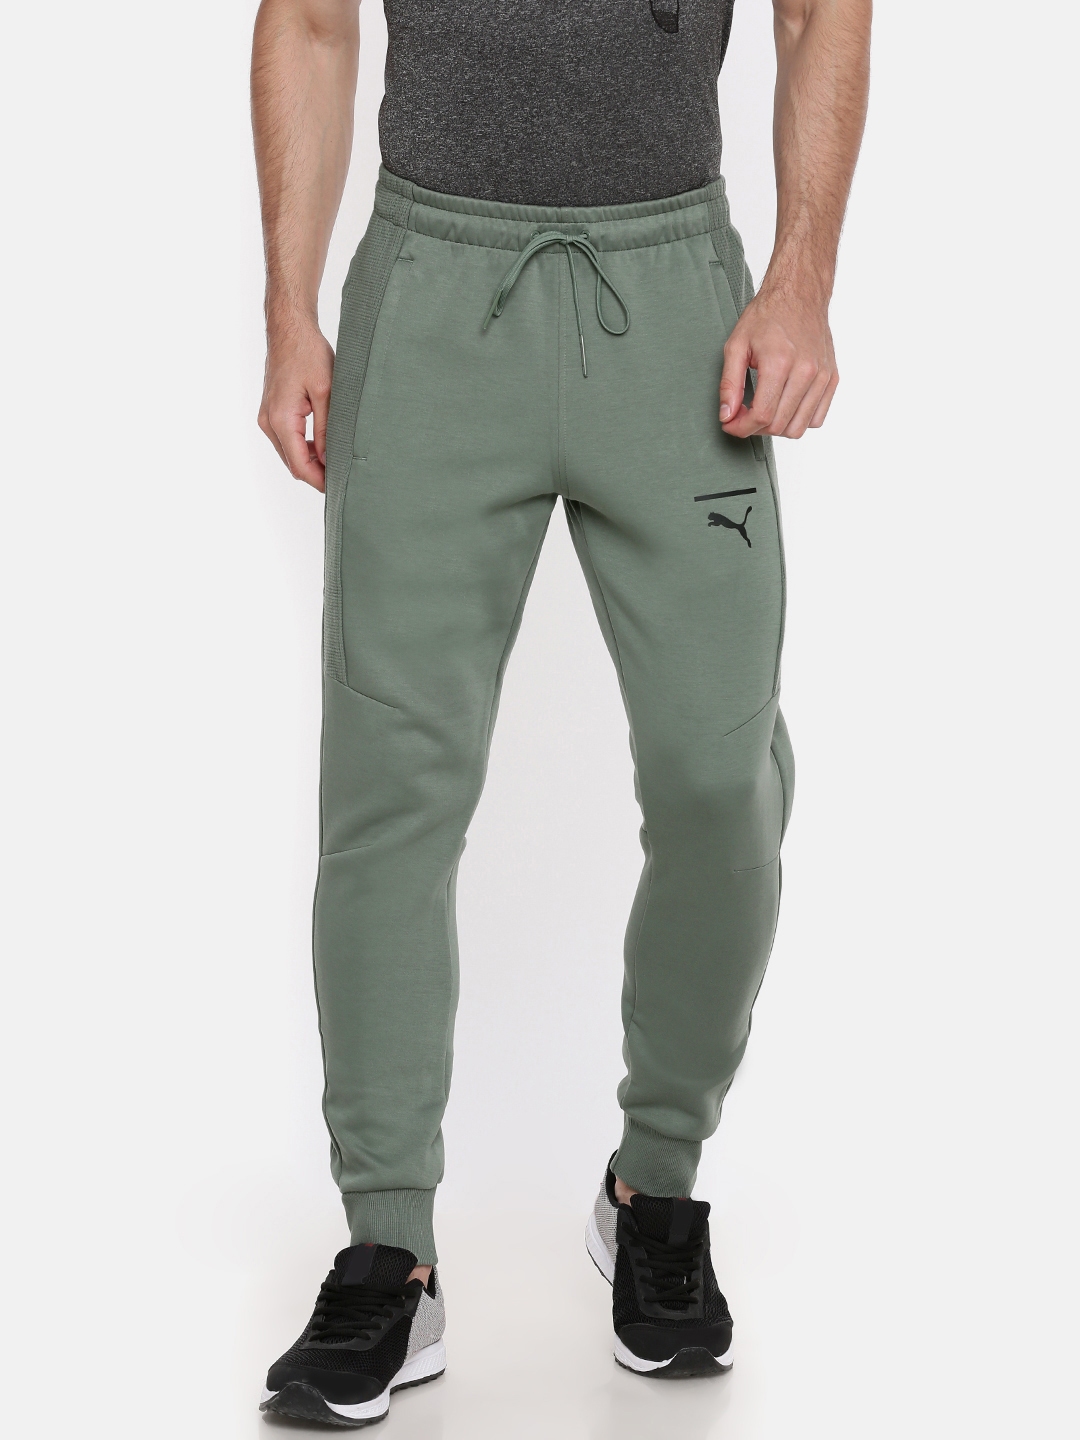 Buy Puma Green Pace Slim Fit Joggers - Track Pants for Men 7072761 | Myntra